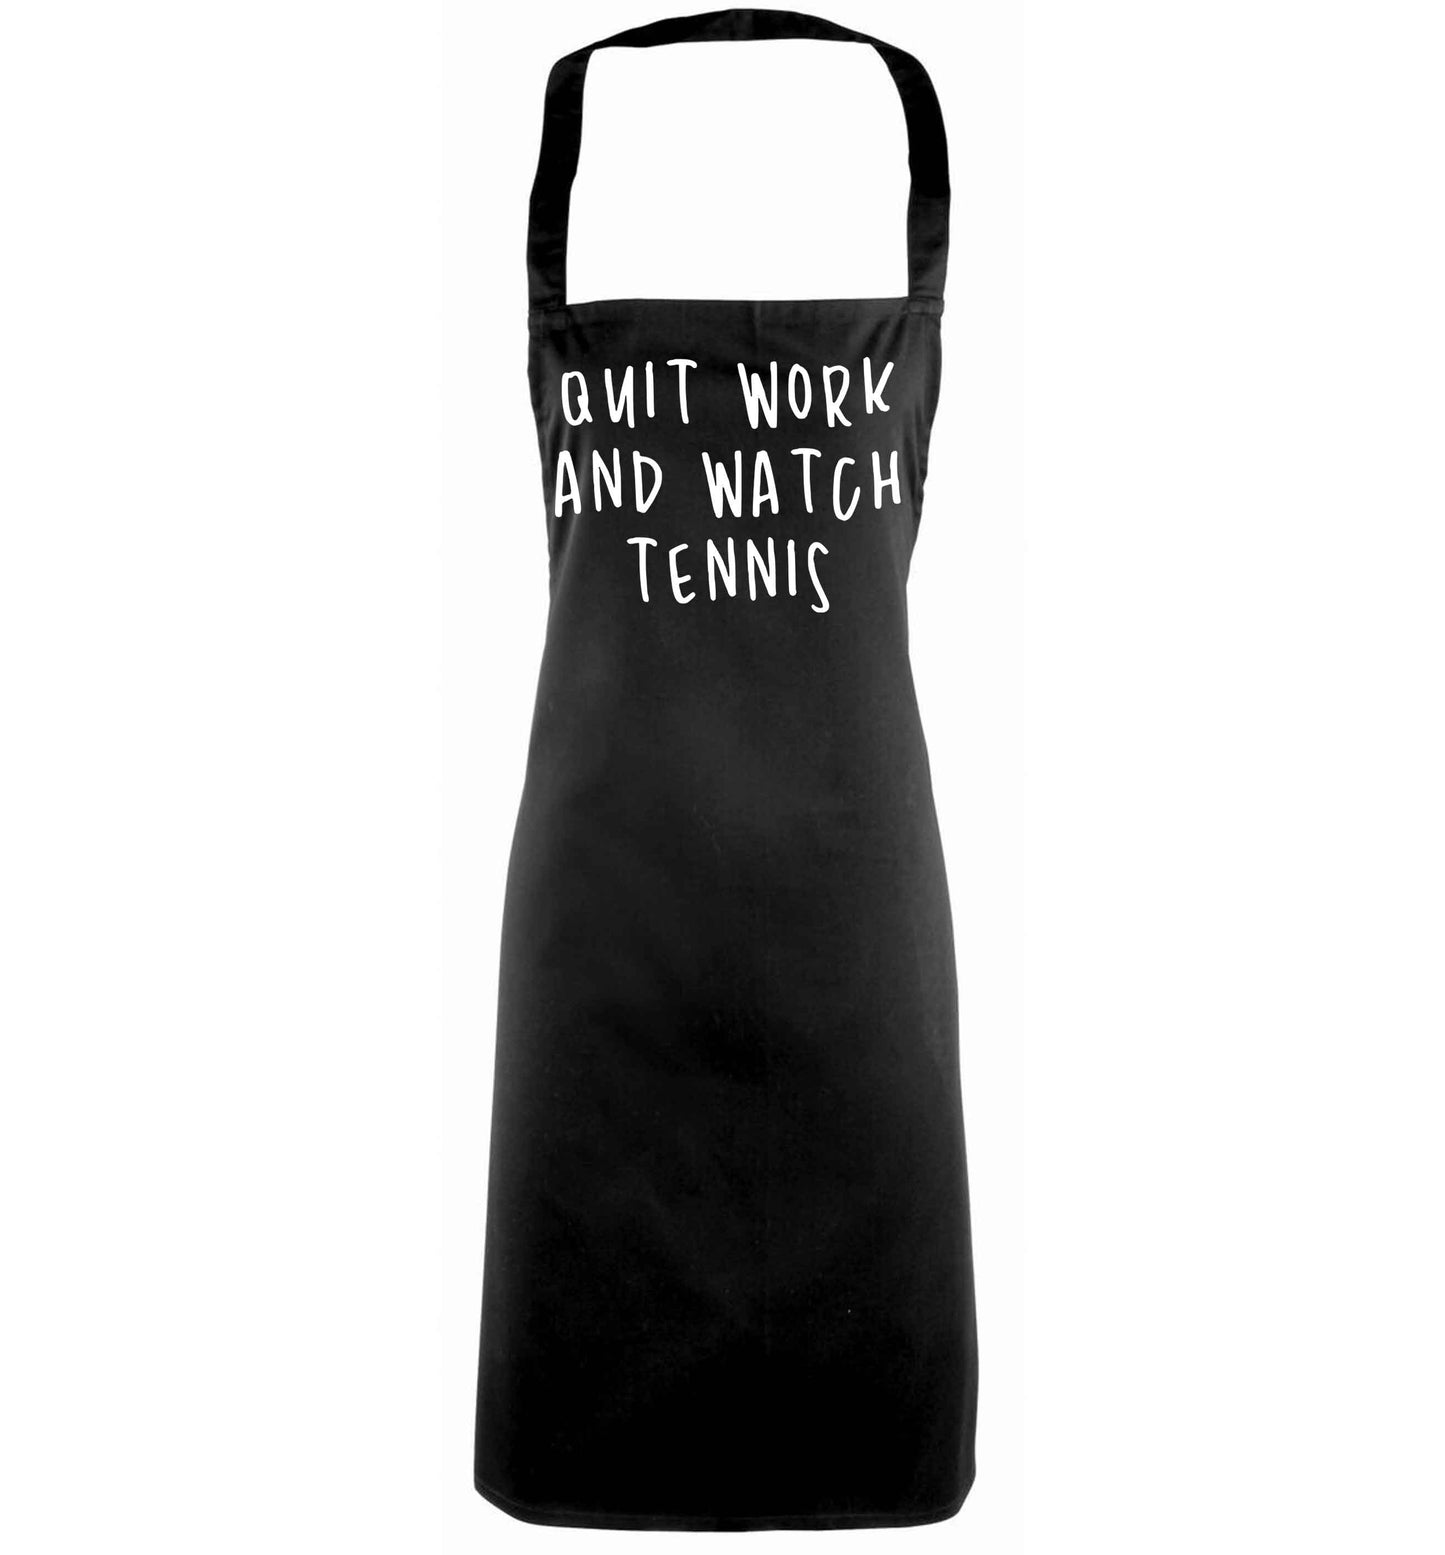 Quit work and watch tennis black apron